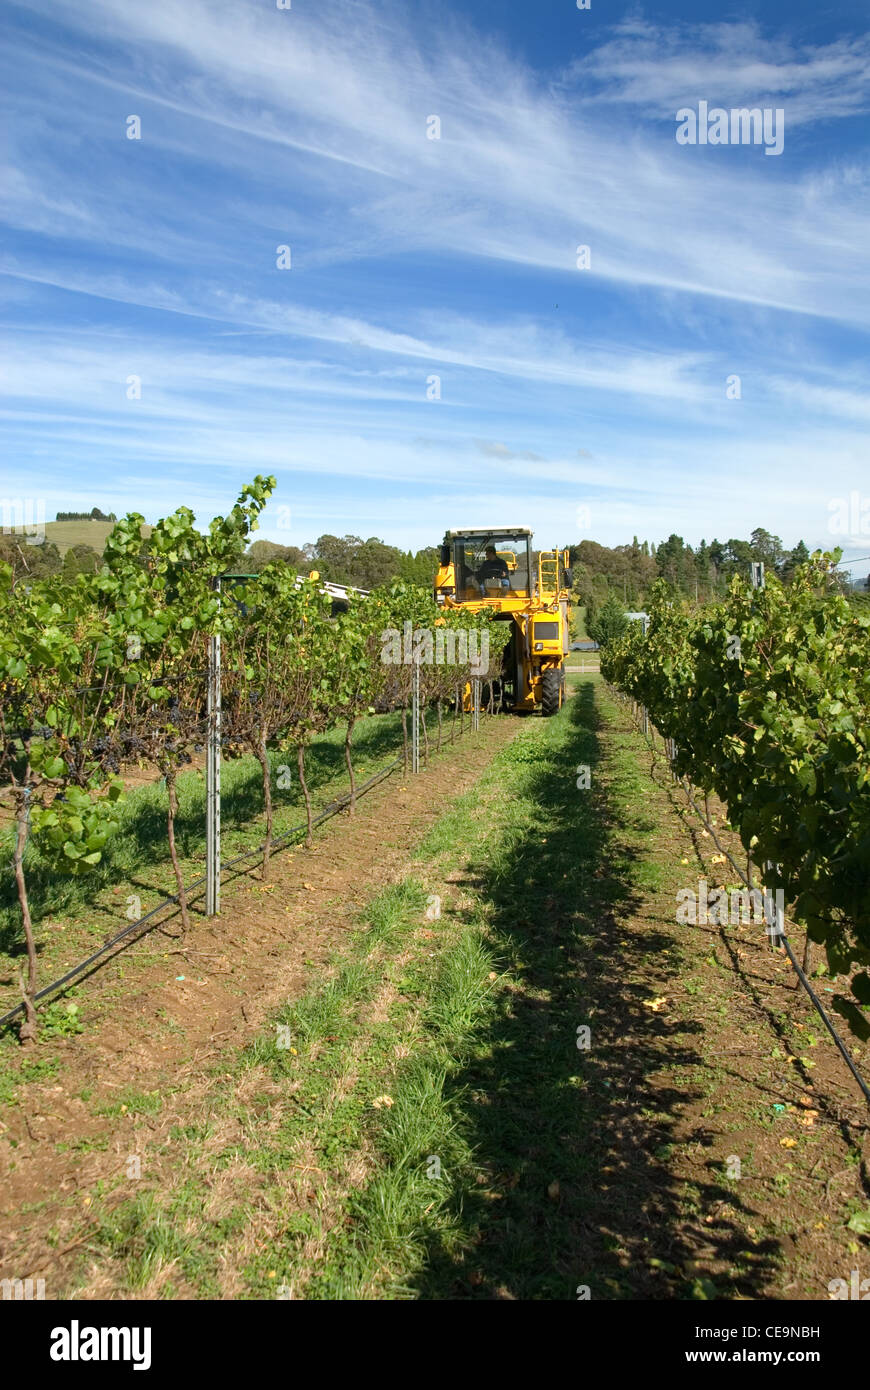 Harvesting grapes in a vineyard near Sutton Forest, New South Wales, Australia Stock Photo